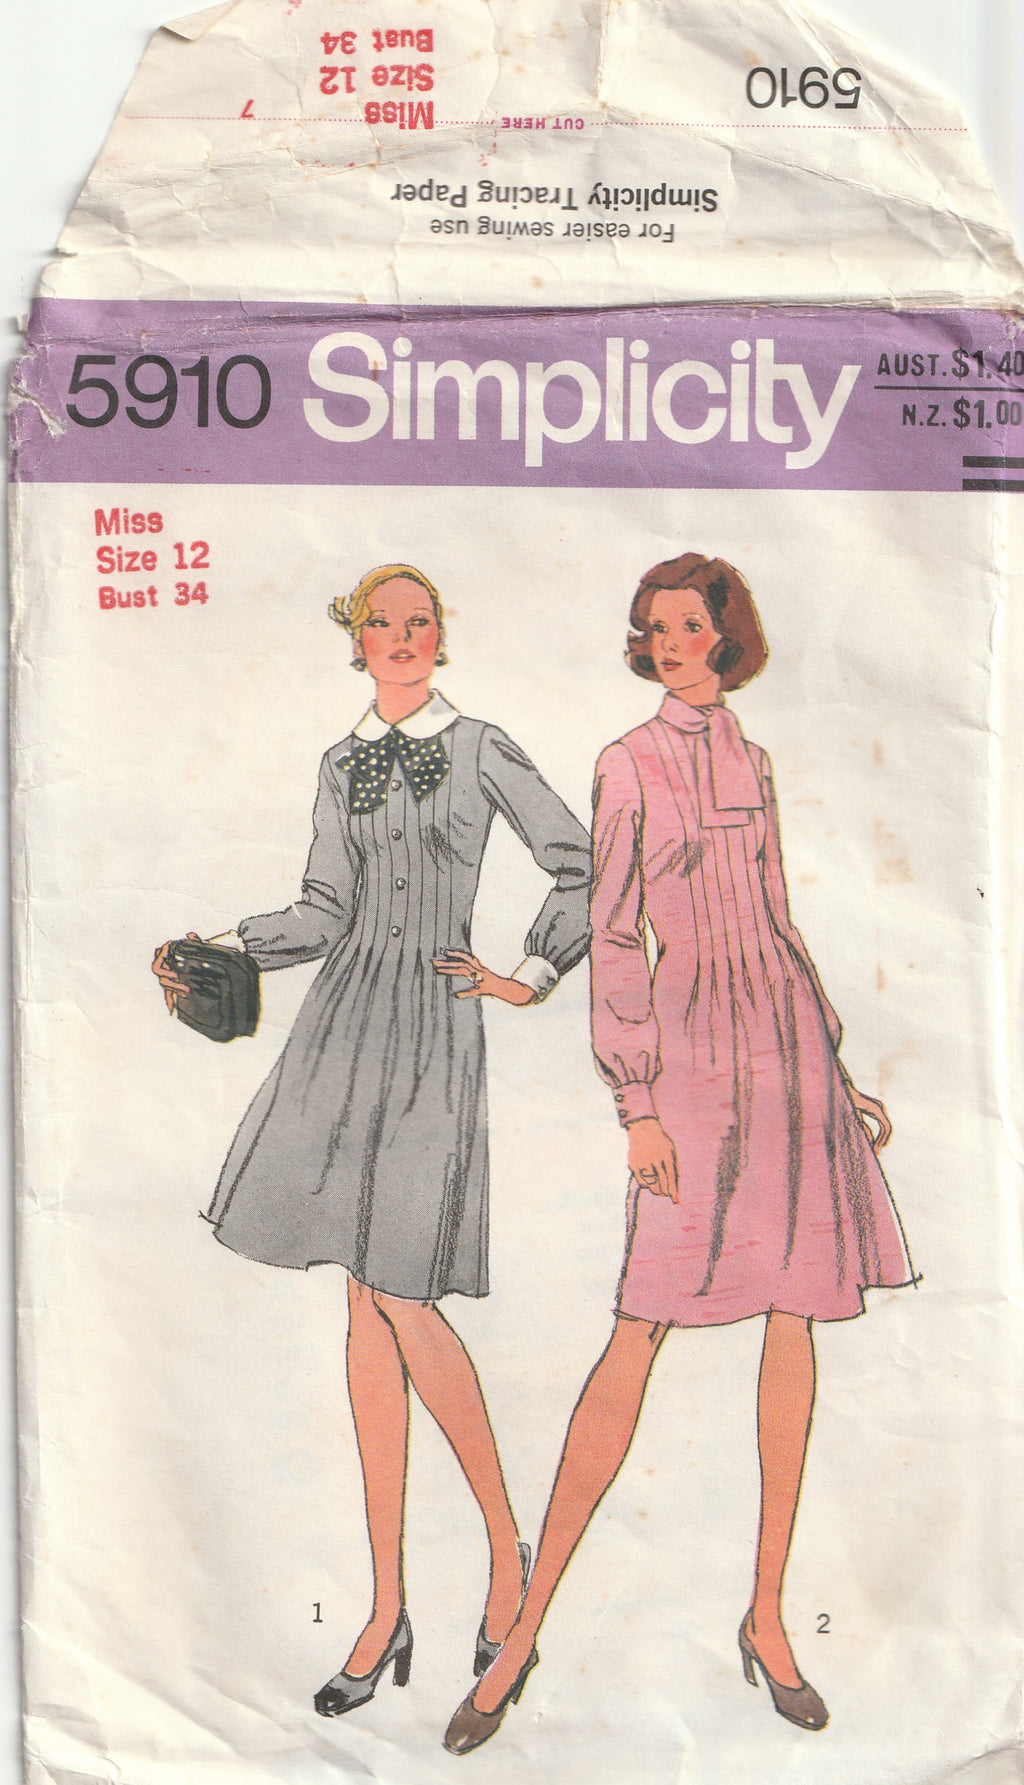 1970s vintage pattern dress with front tucks simplicity 5910 1973 bust 87 cm